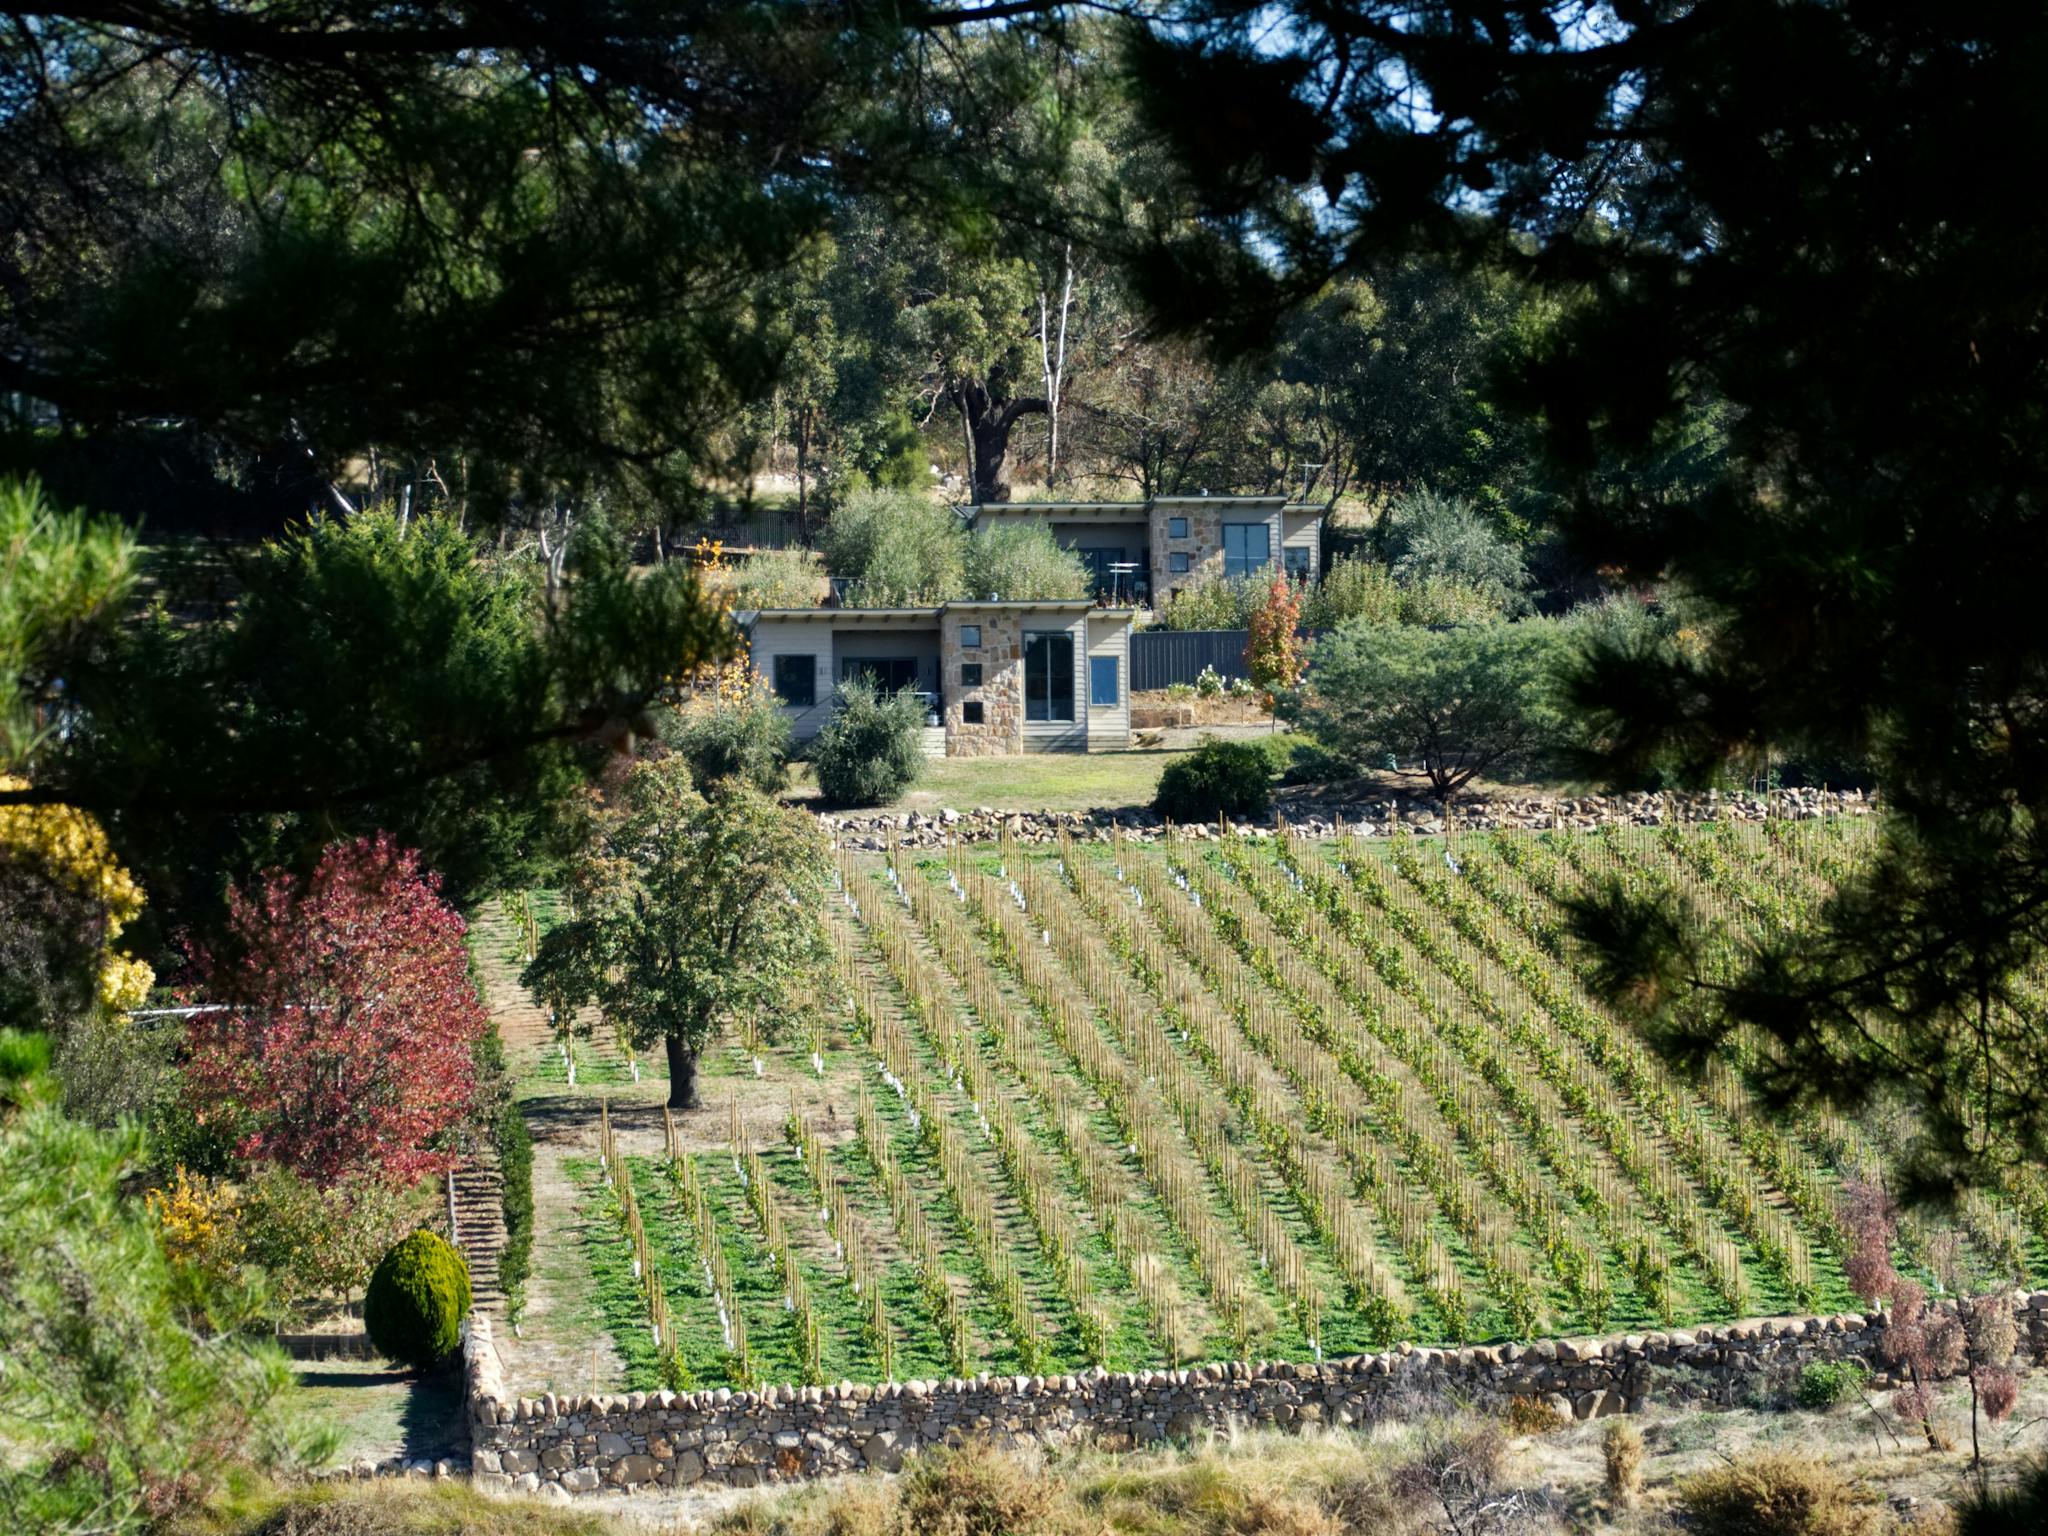 View of the villas from the Beechworth Gorge